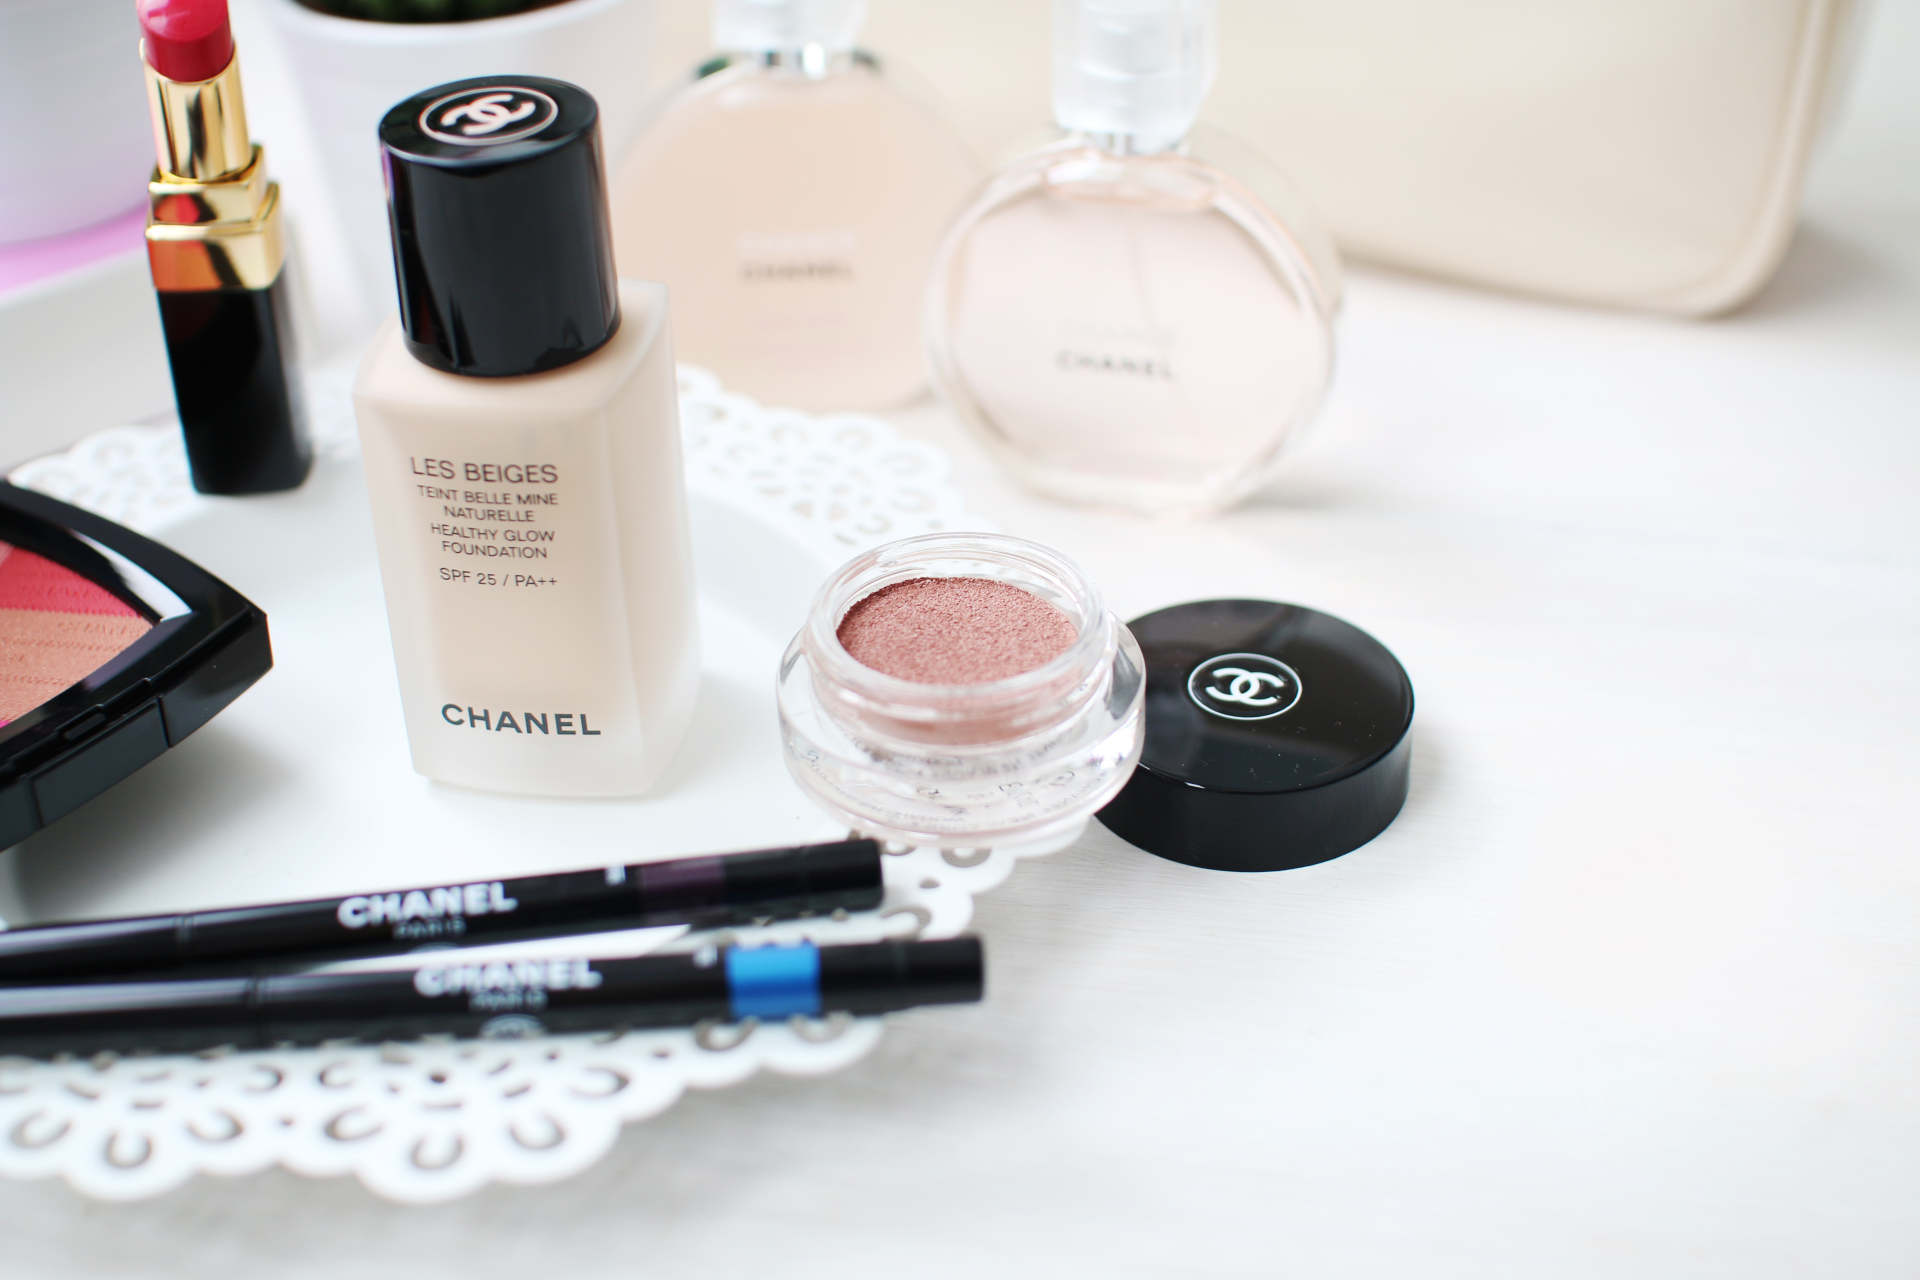 Chanel Les Beiges and spring collection